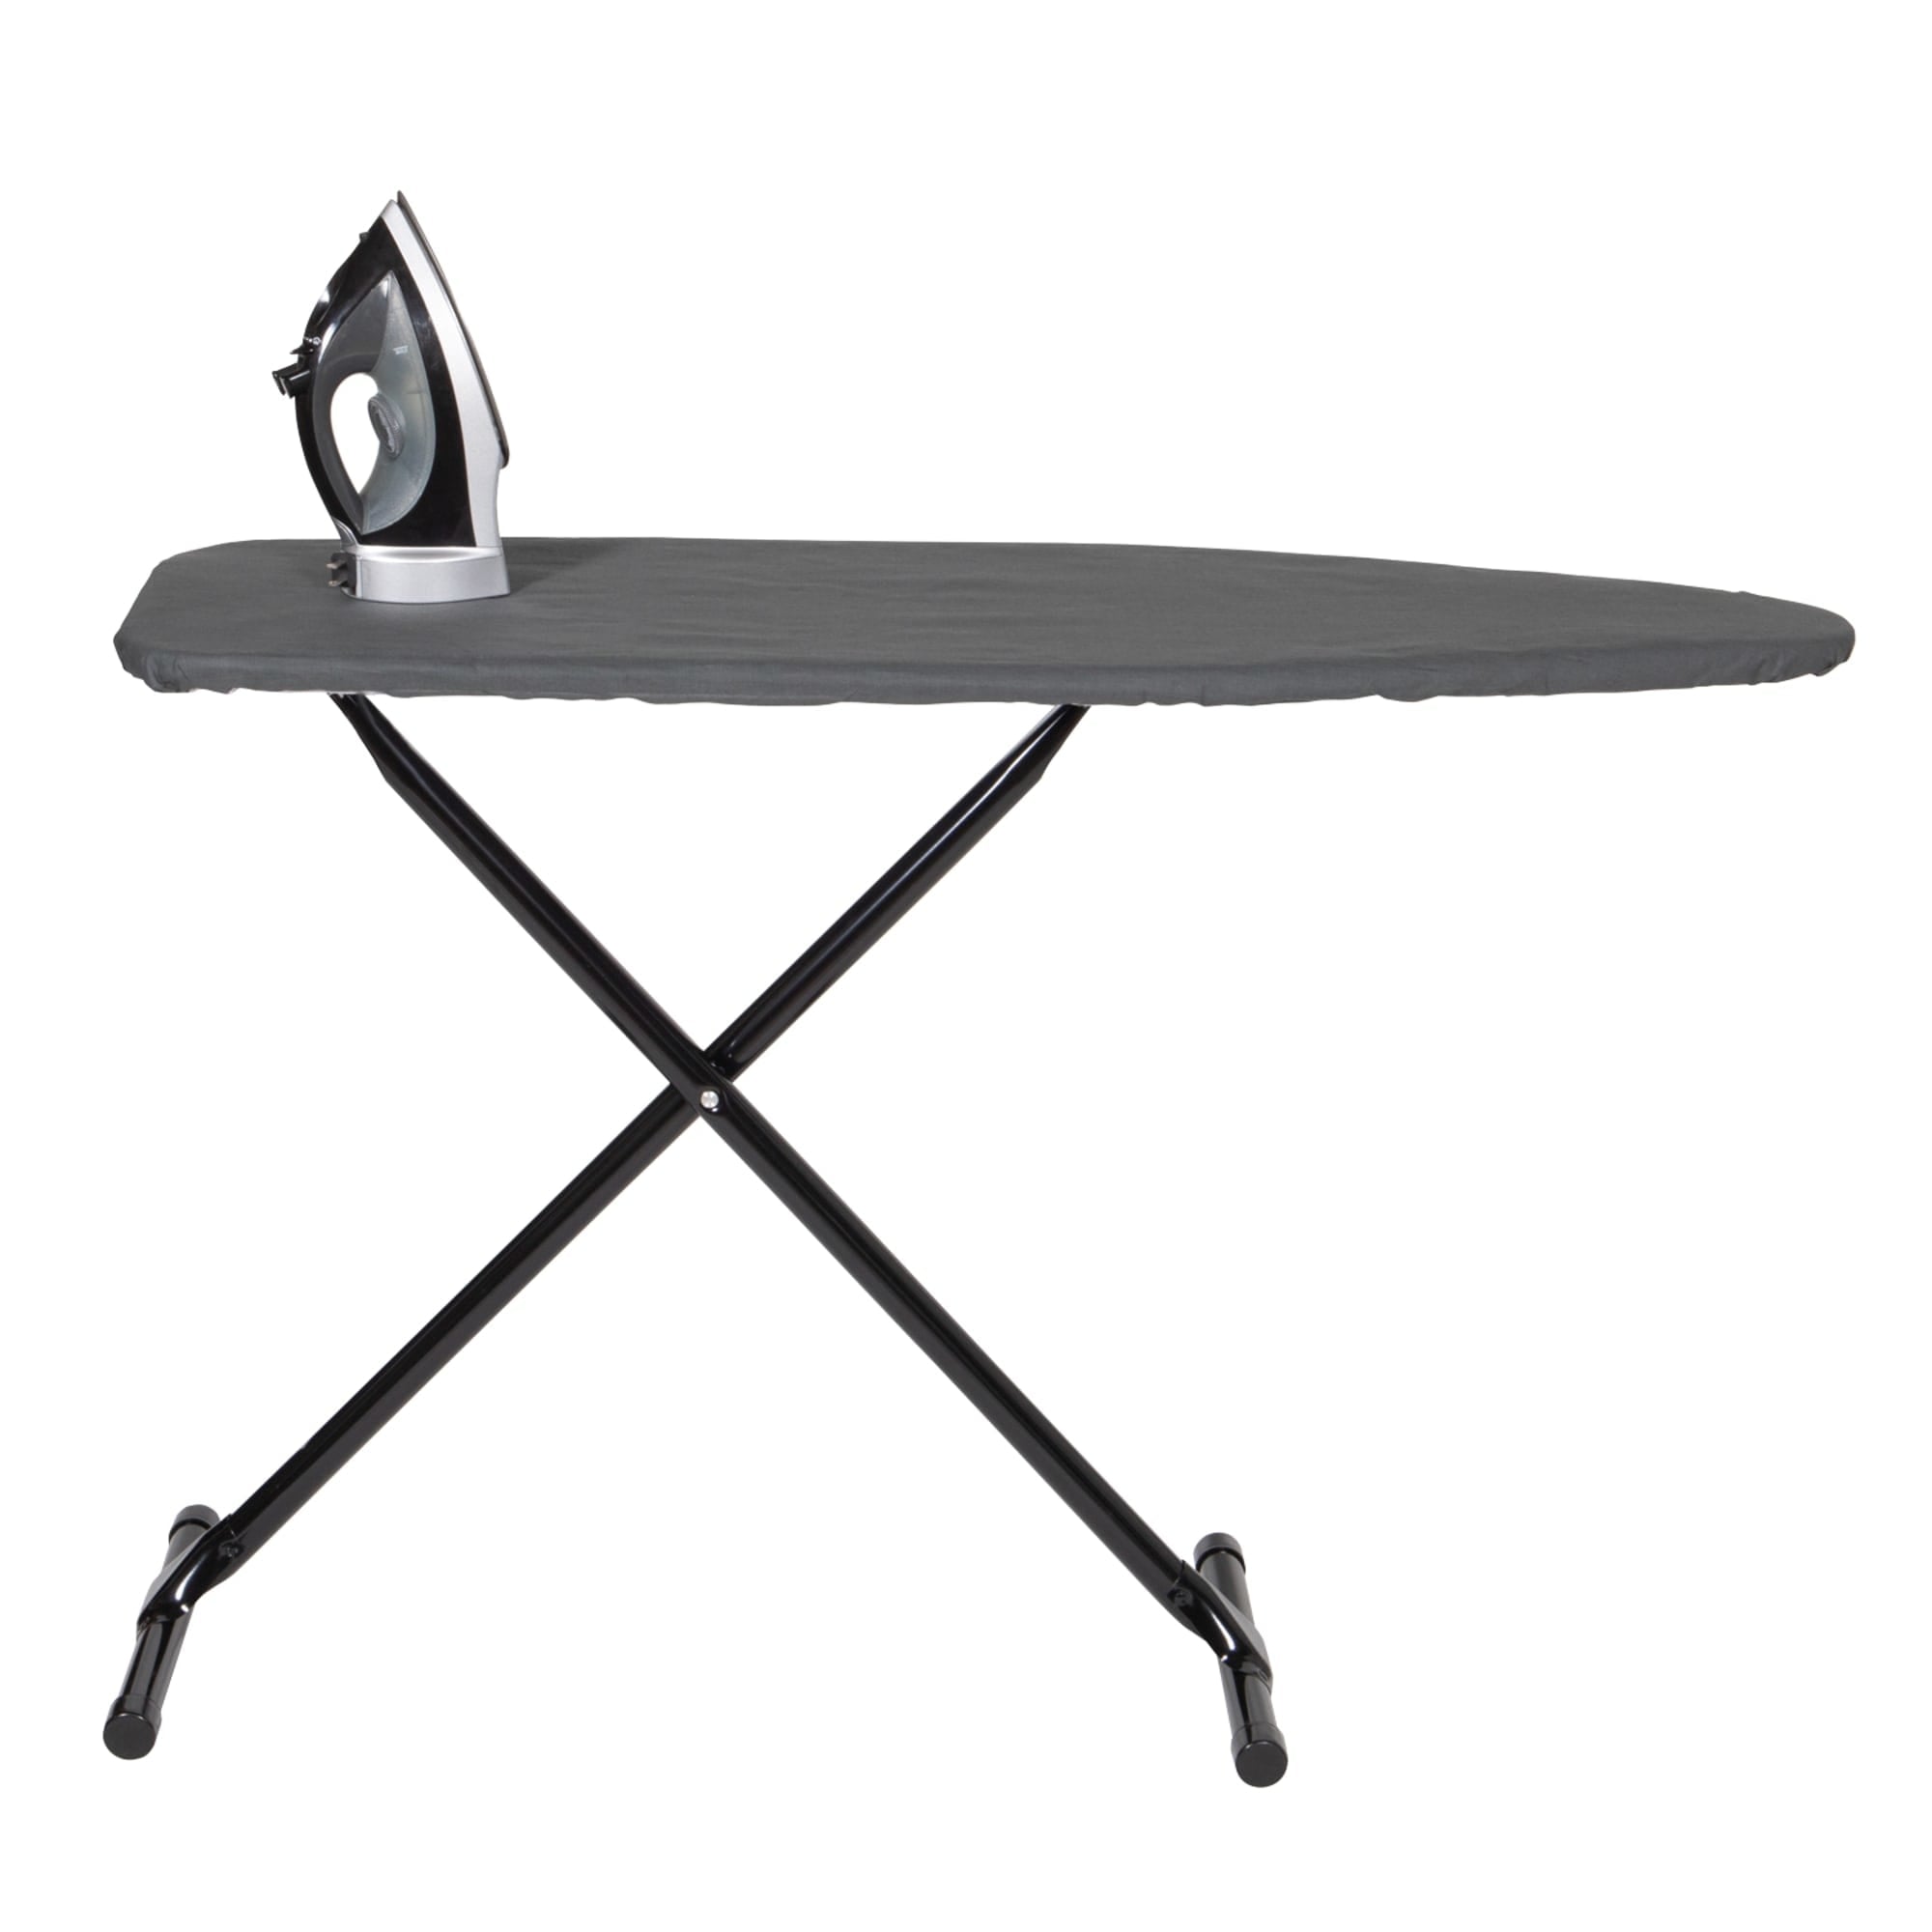 Seymour Home Products Wardroboard, Adjustable Height Ironing Board, Charcoal (4 Pack) $30.00 EACH, CASE PACK OF 4